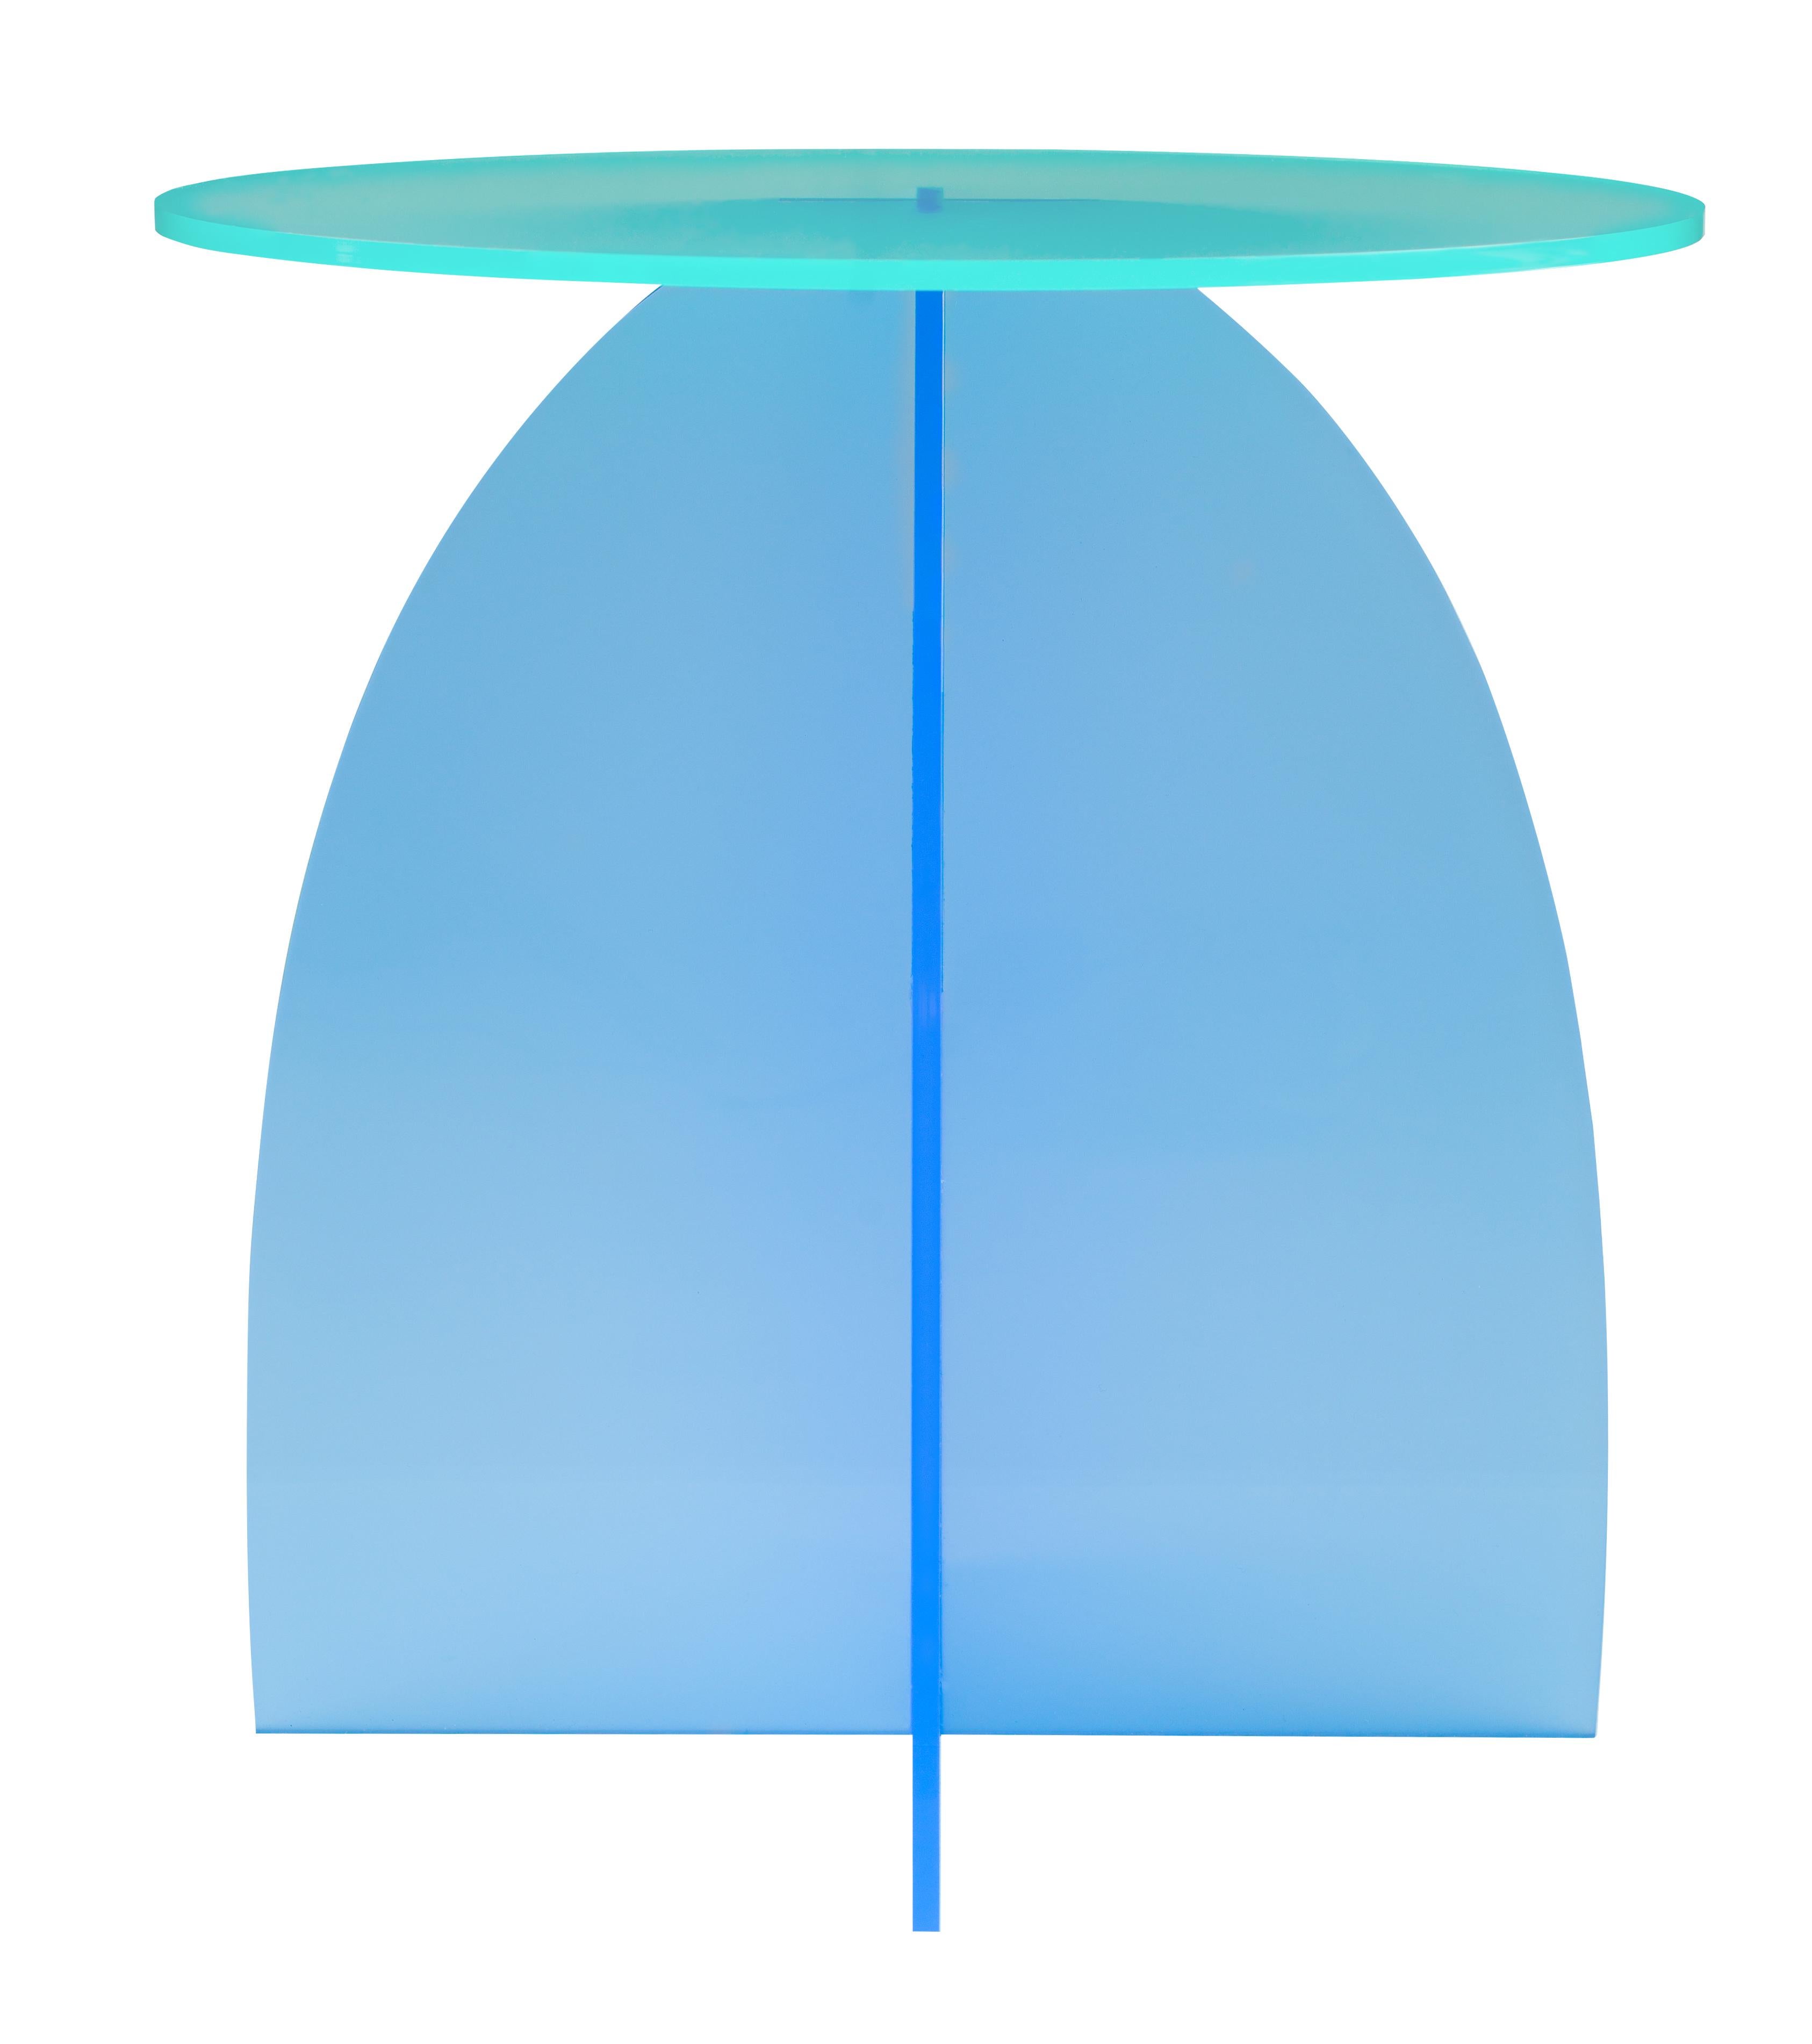 Modern Azure Circular Acrylic Side Tables, Sheer by Carnevale Studio For Sale